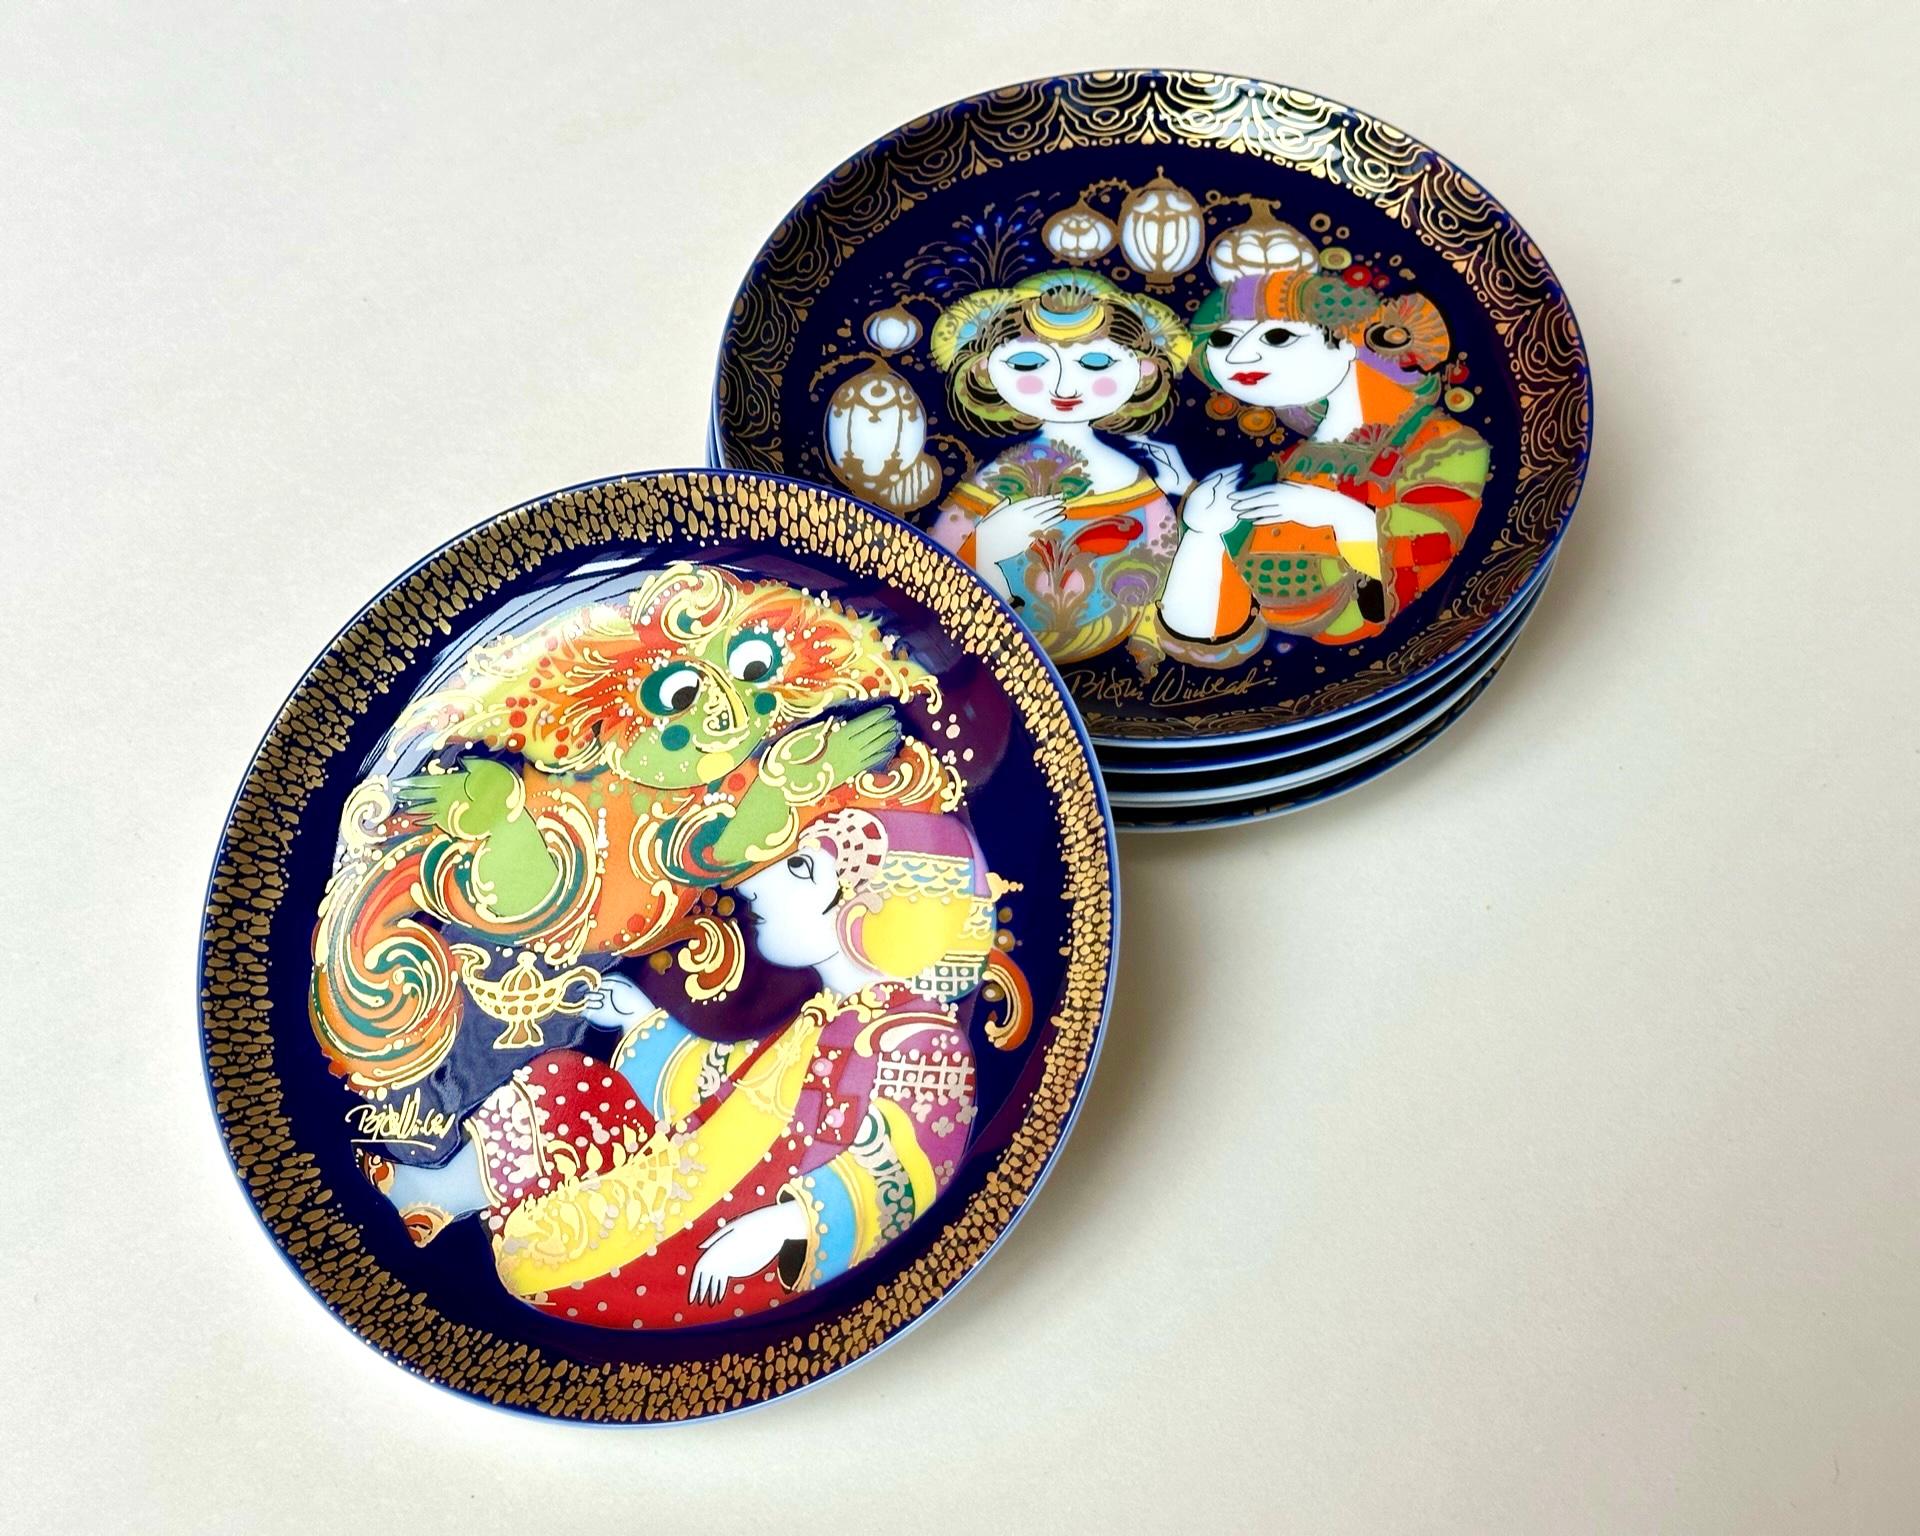 Porcelain Beautiful Collectible Plates Bjorn Wiinblad, Rosenthal, Germany, 1970s For Sale